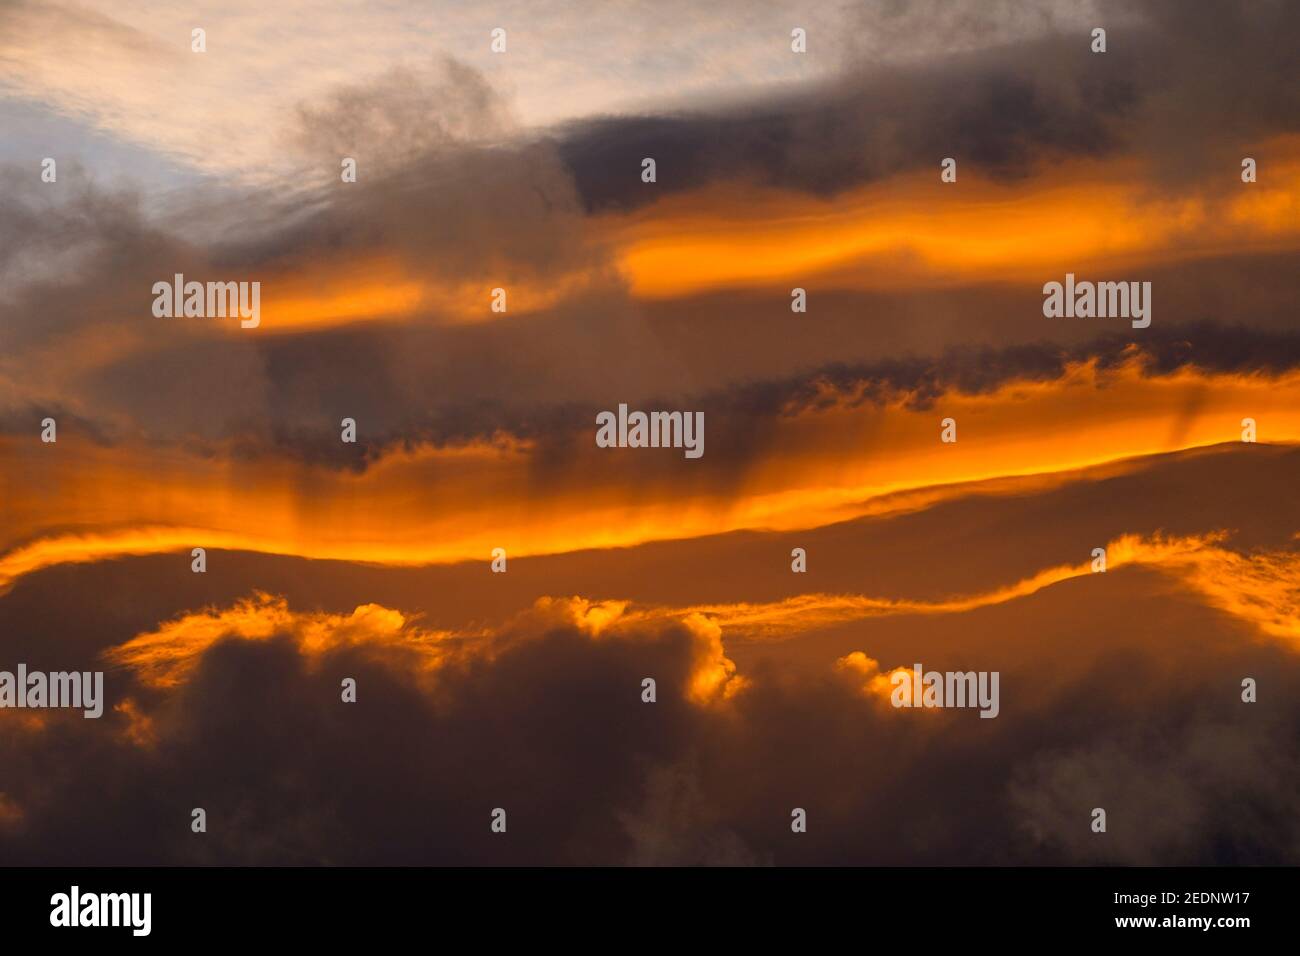 Detail of a dramatic sunset sky, Southern Spain Stock Photo